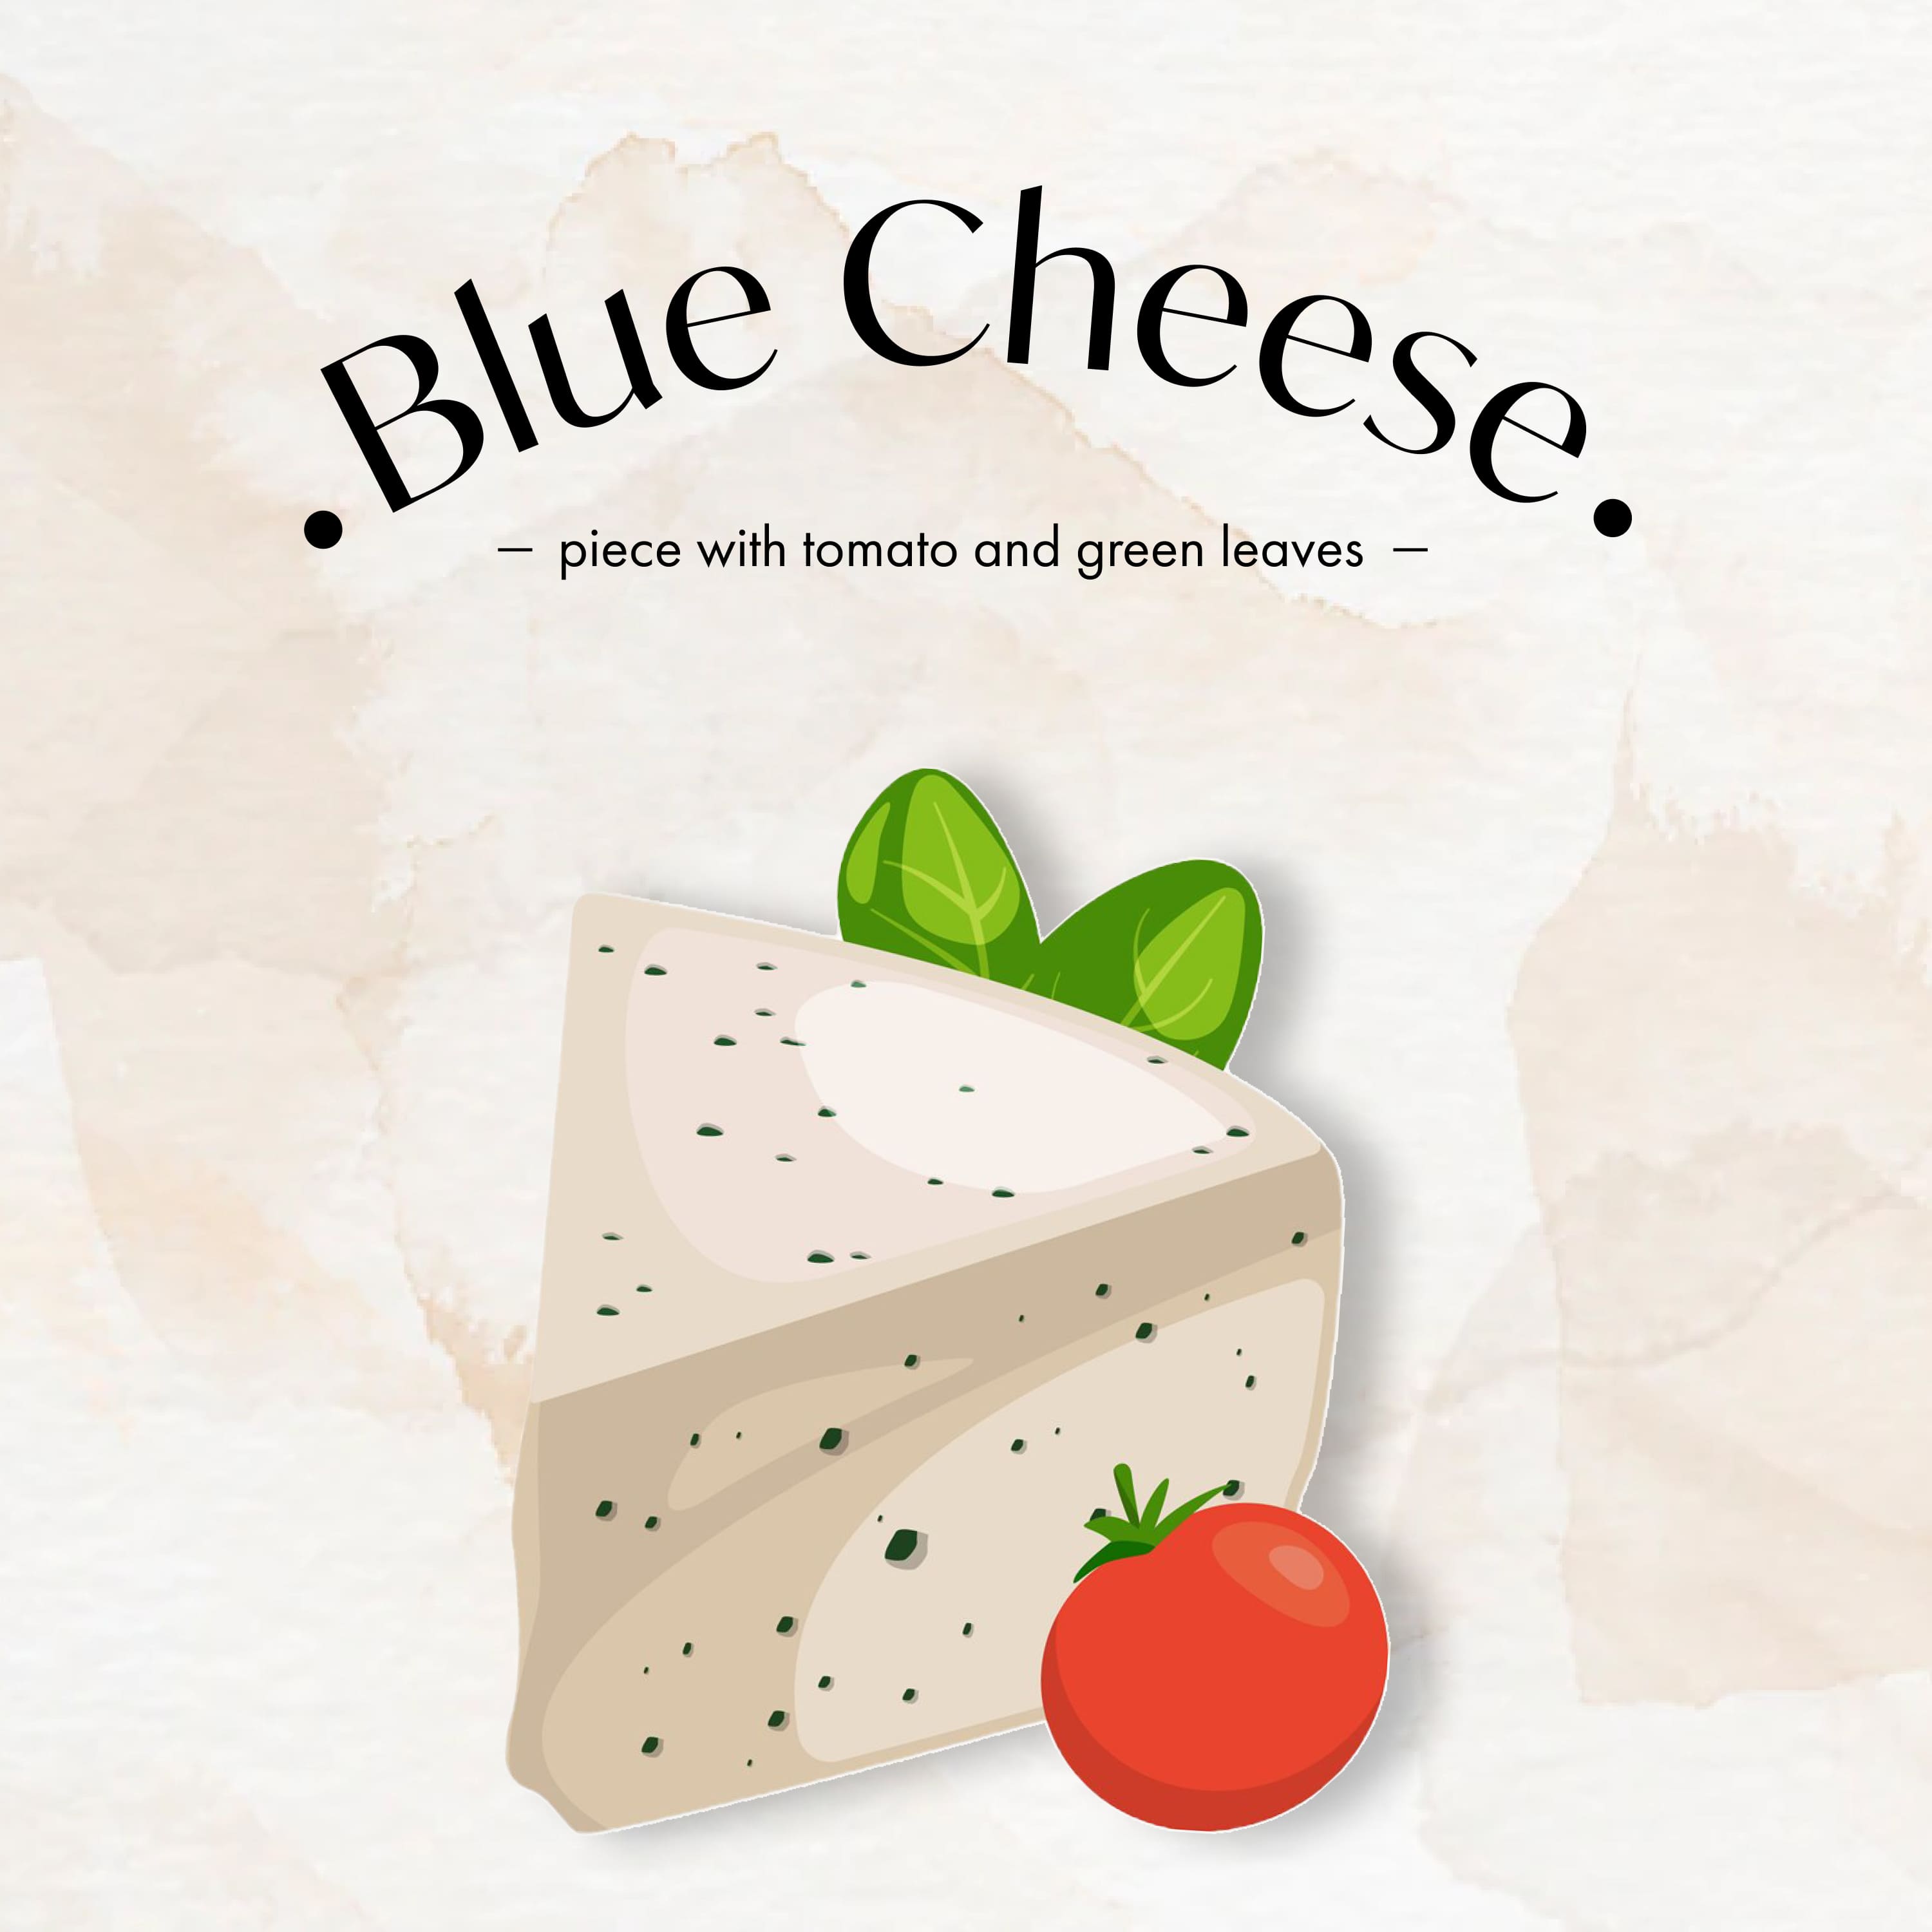 Colorful image of blue cheese and tomato.